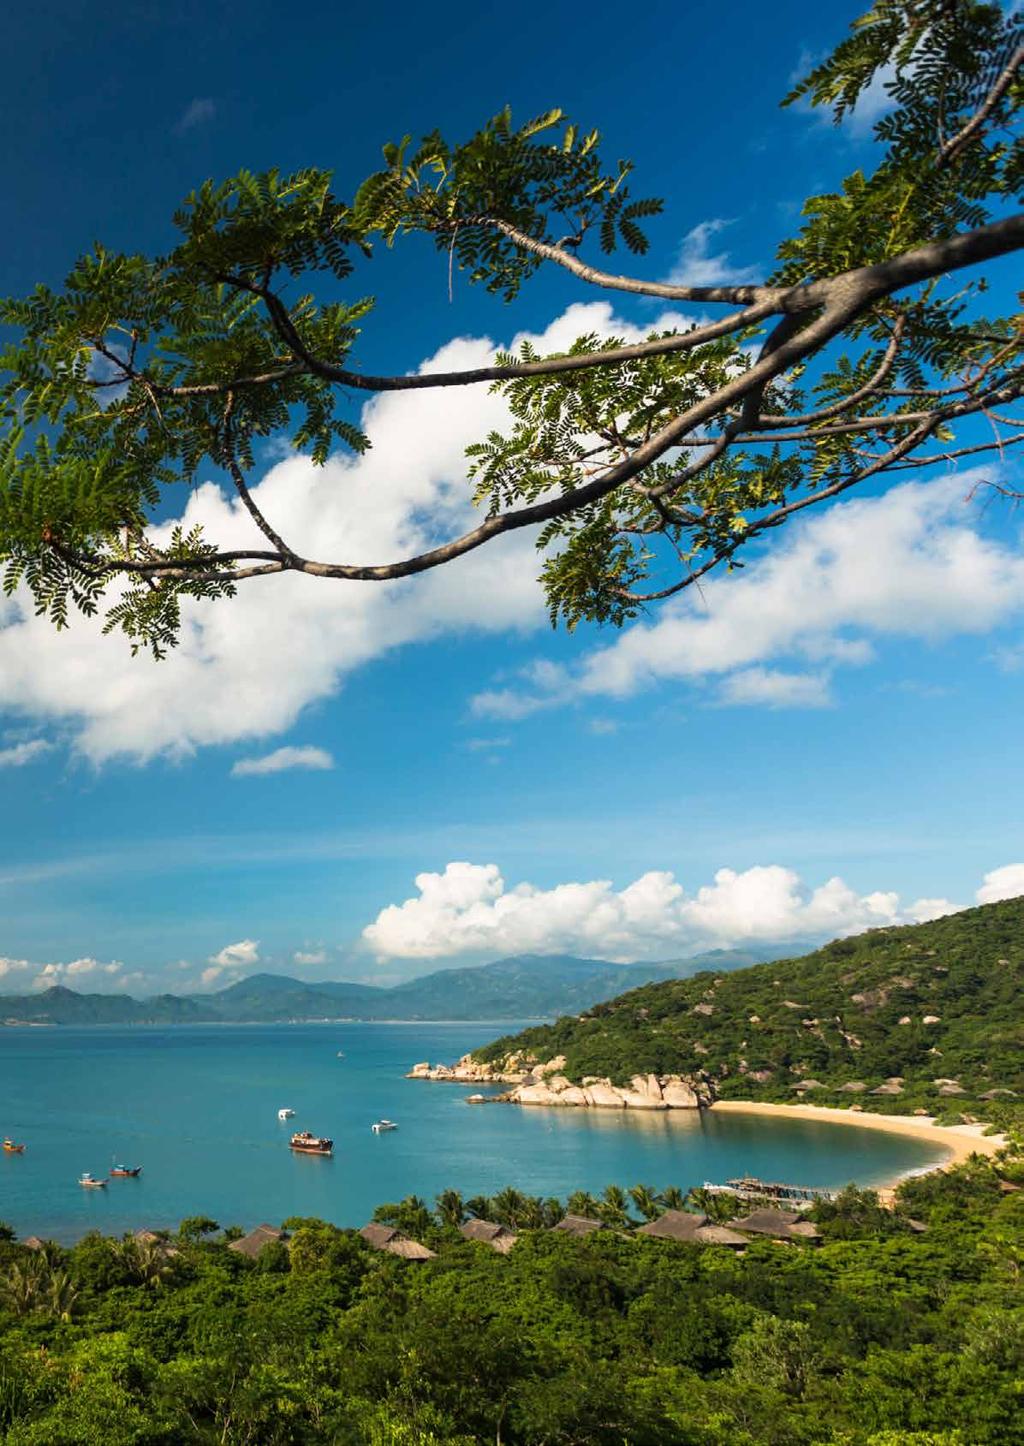 Six Senses Ninh Van Bay sits on a dramatic coral bay with golden sand and towering mountains.